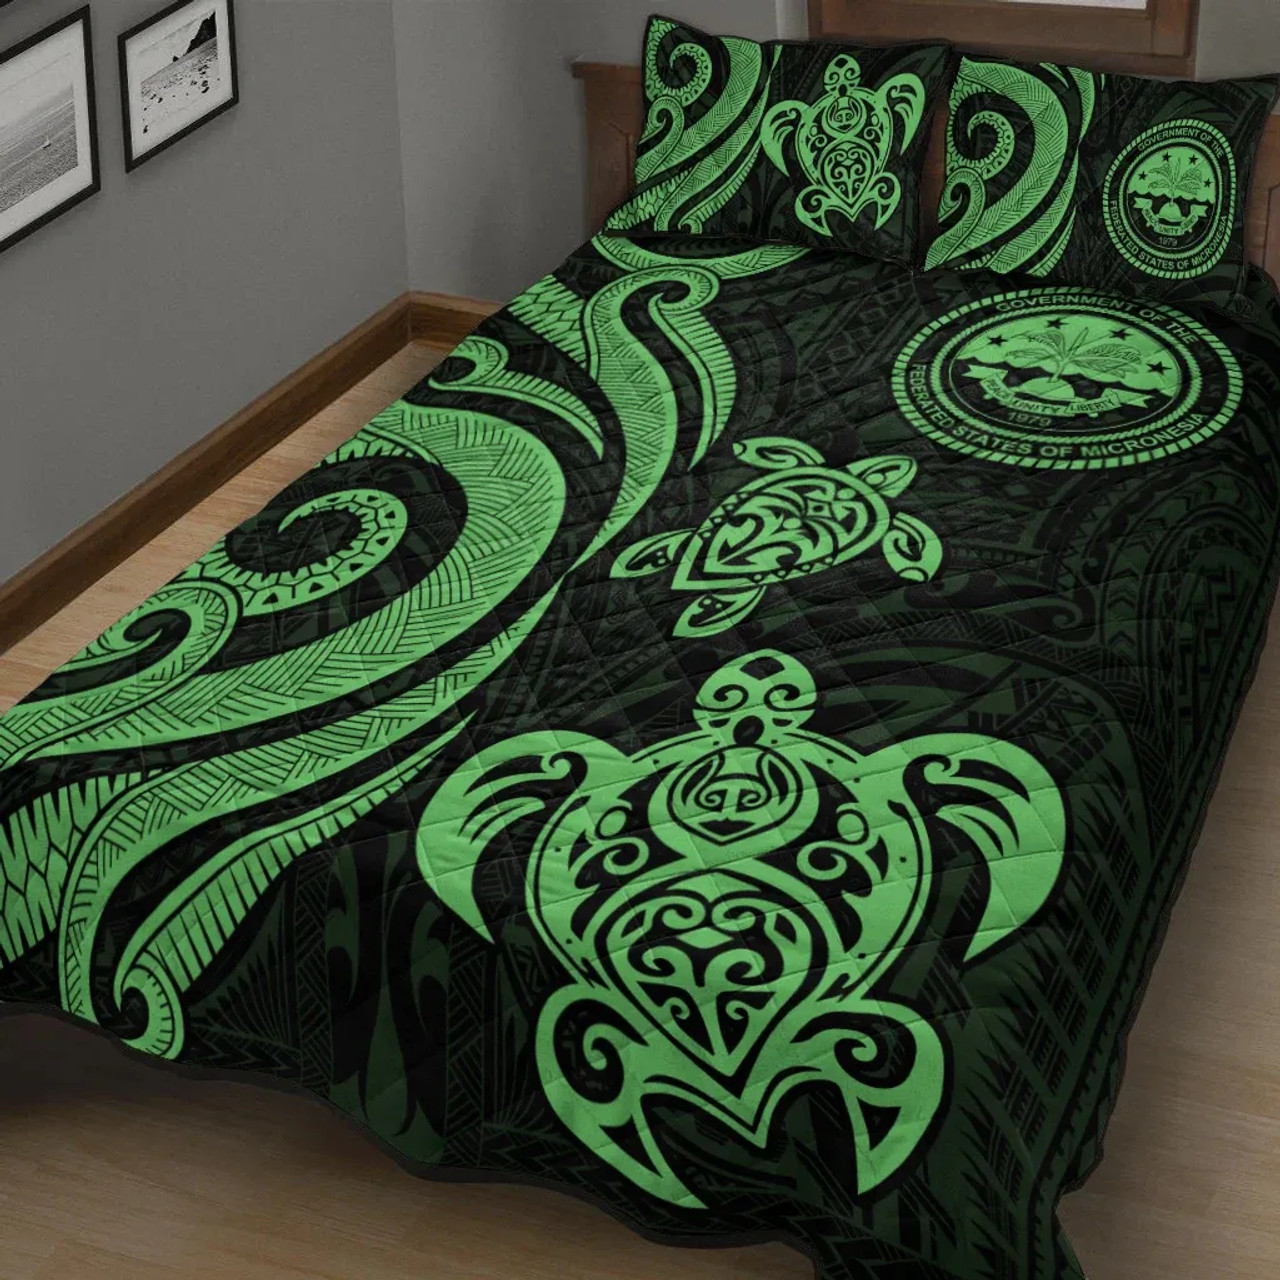 Federated States of Micronesia Quilt Bed Set - Green Tentacle Turtle 2